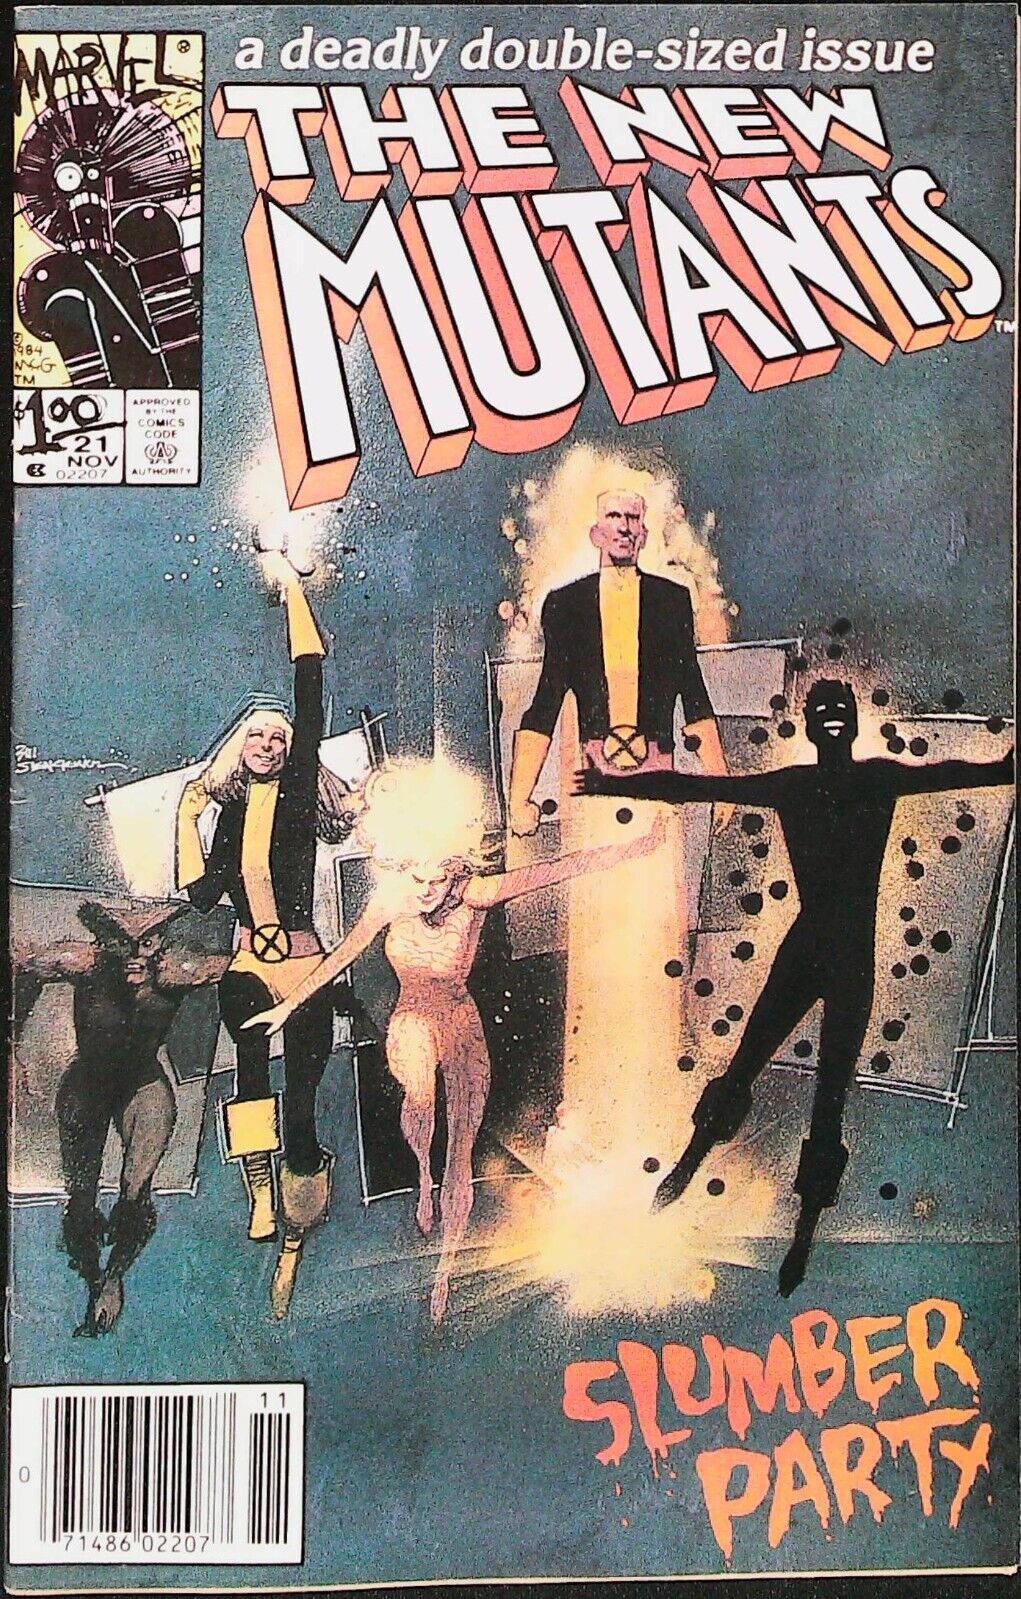 The New Mutants #21 Vol 1 1984 KEY Double Size Newsstand Edition-Very Fine Range